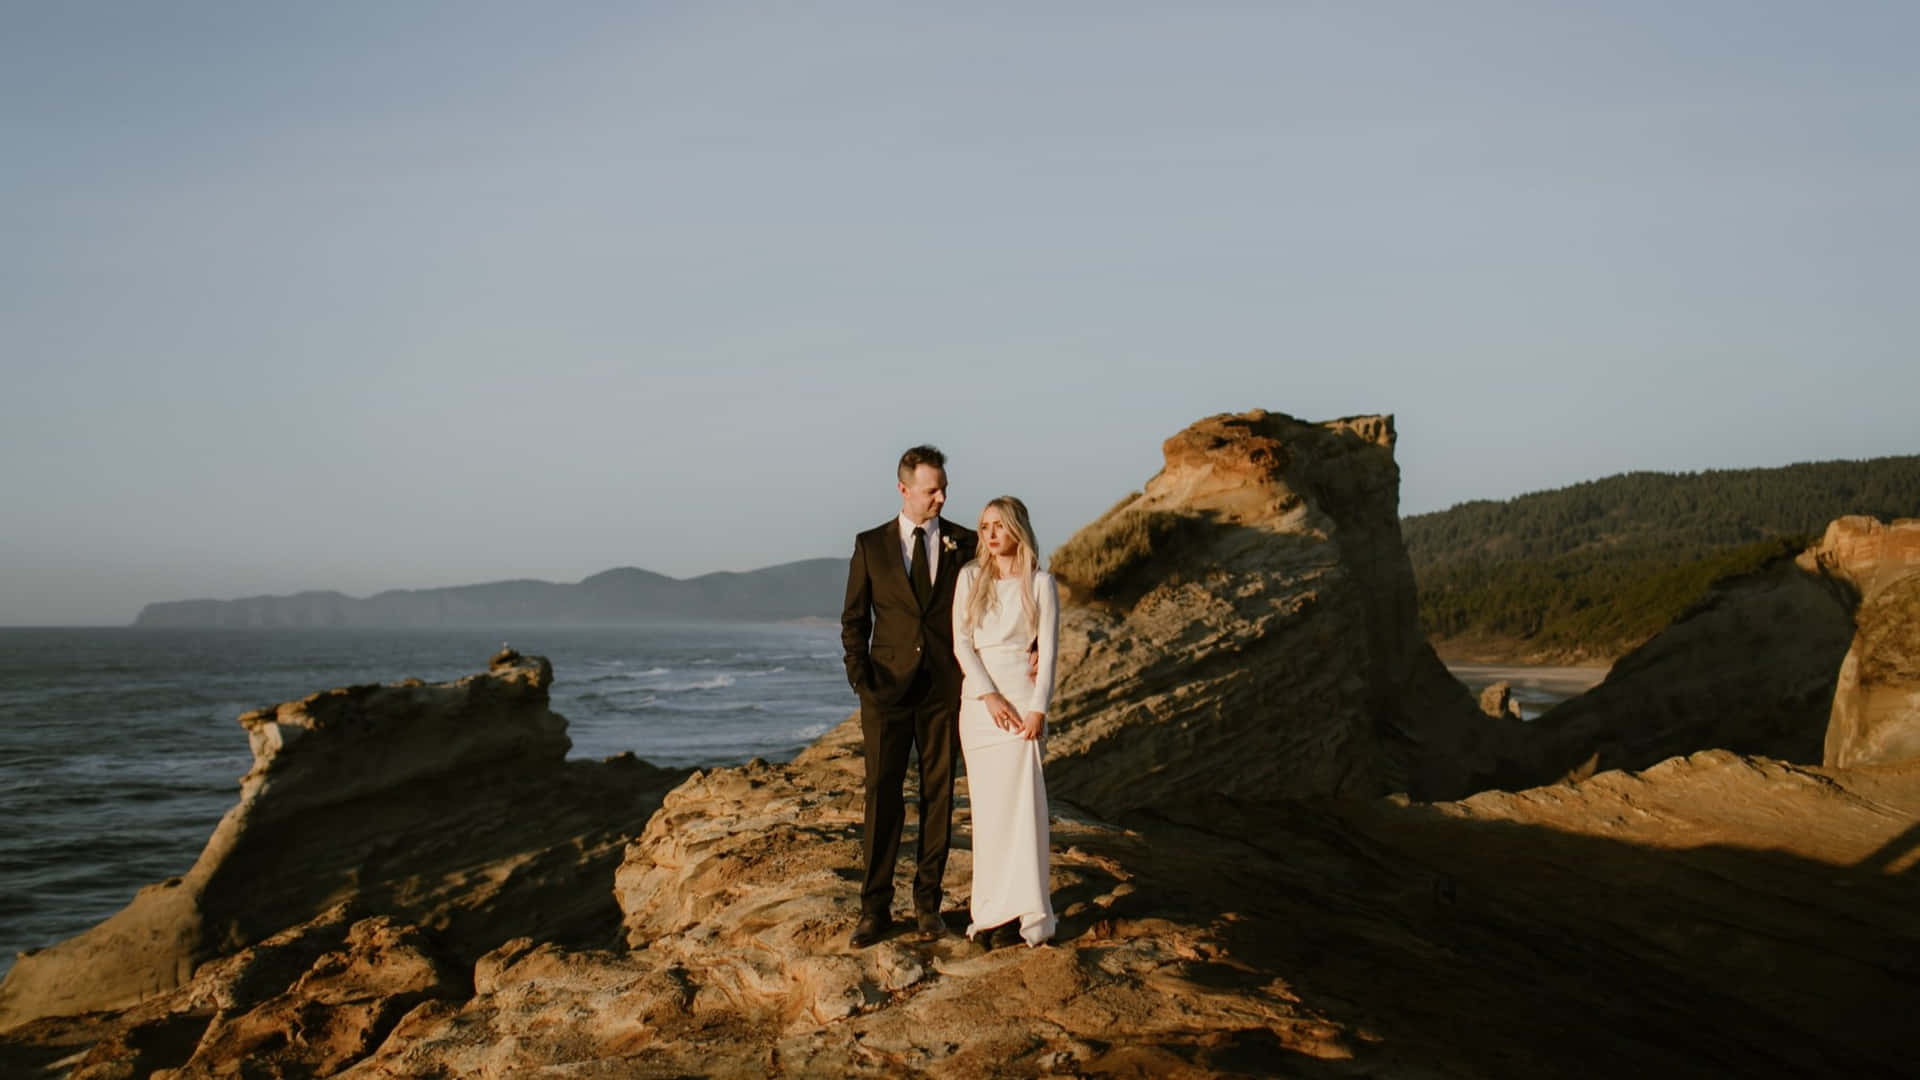 A Bride And Groom Standing On A Rock In Front Of The Ocean